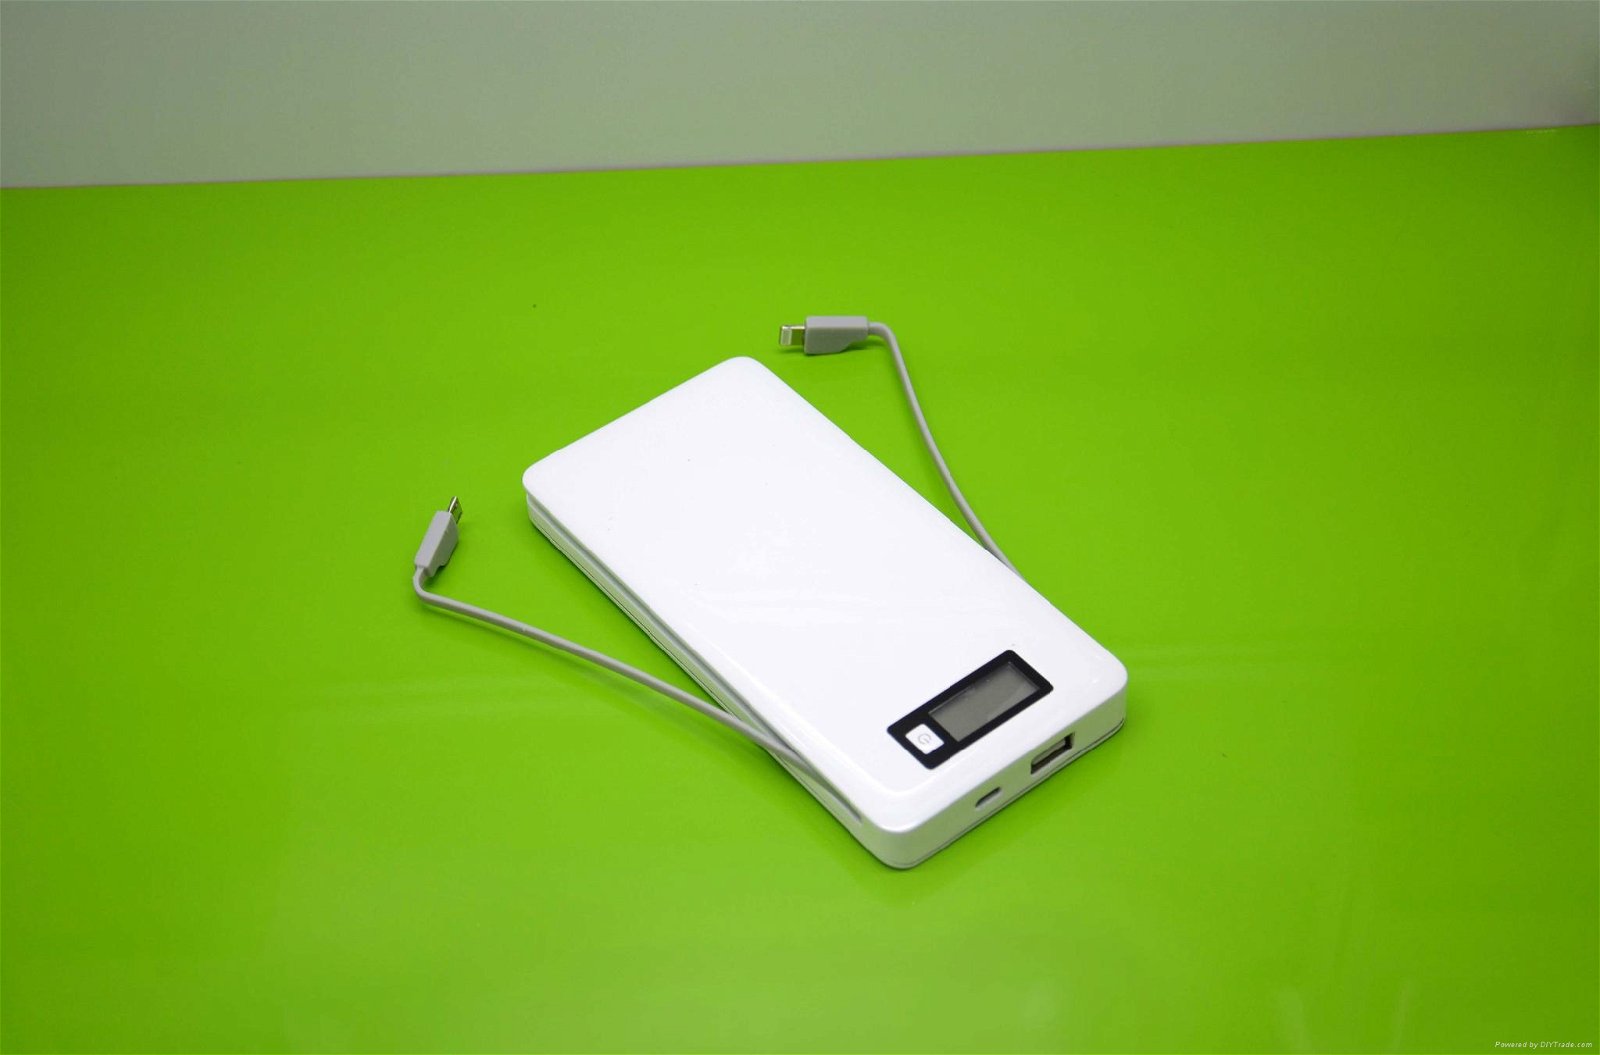 New 7000mAh Universal Portable Power Bank Battery Charger for Mobile Devices 4